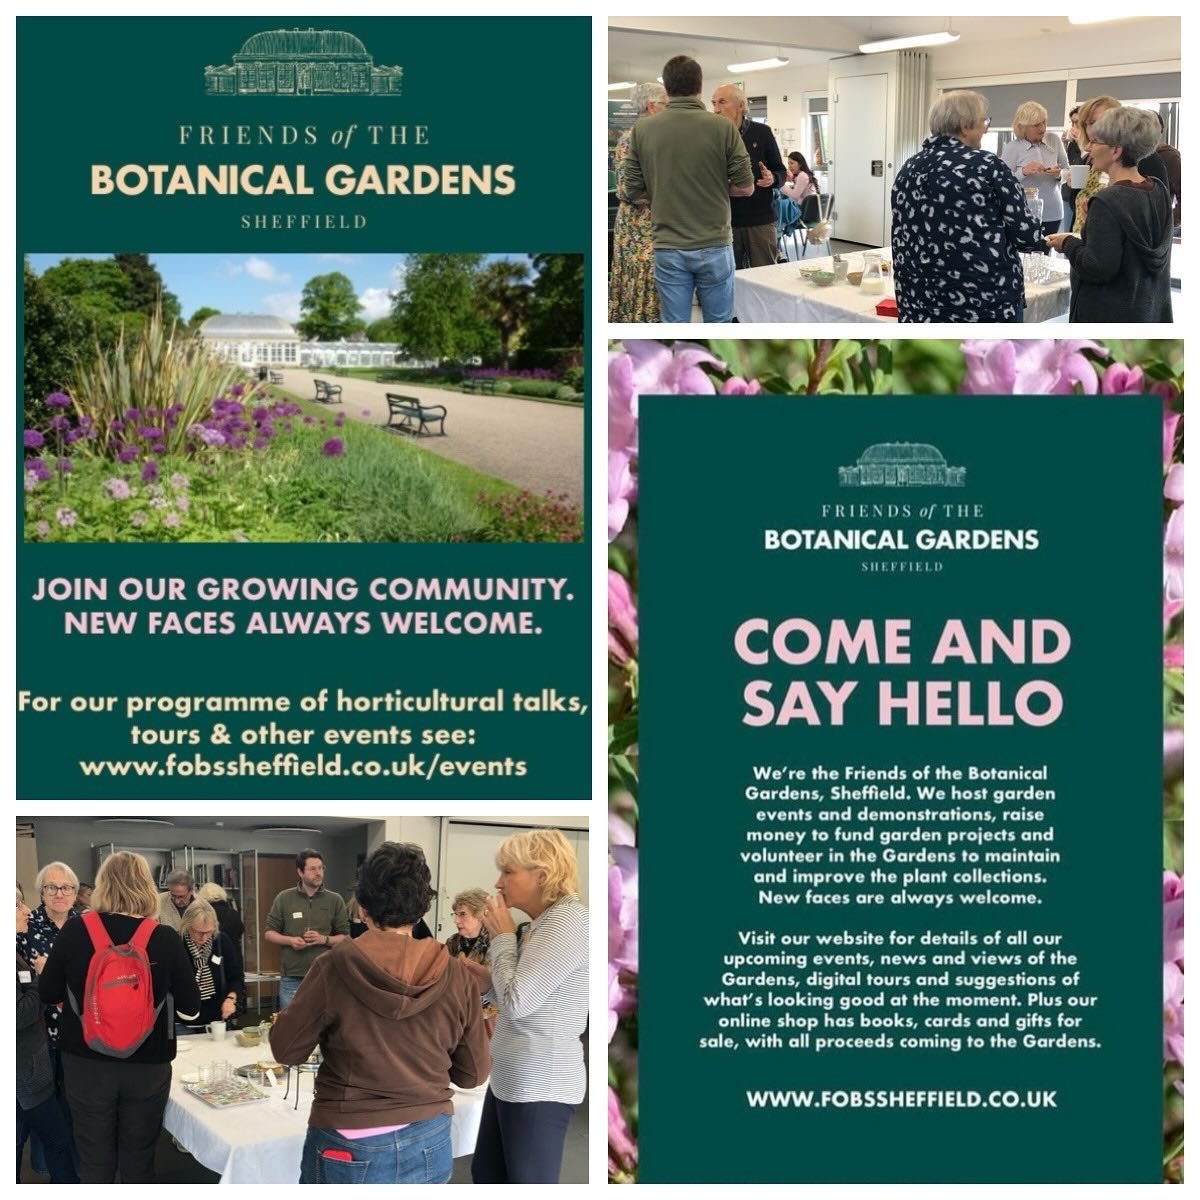 We held our New Members morning yesterday - it was a great opportunity to say hello and to welcome new Friends who have recently joined us.
After short inputs on the background and benefit of joining @fobsheffield (discounts, free talks programme, ga